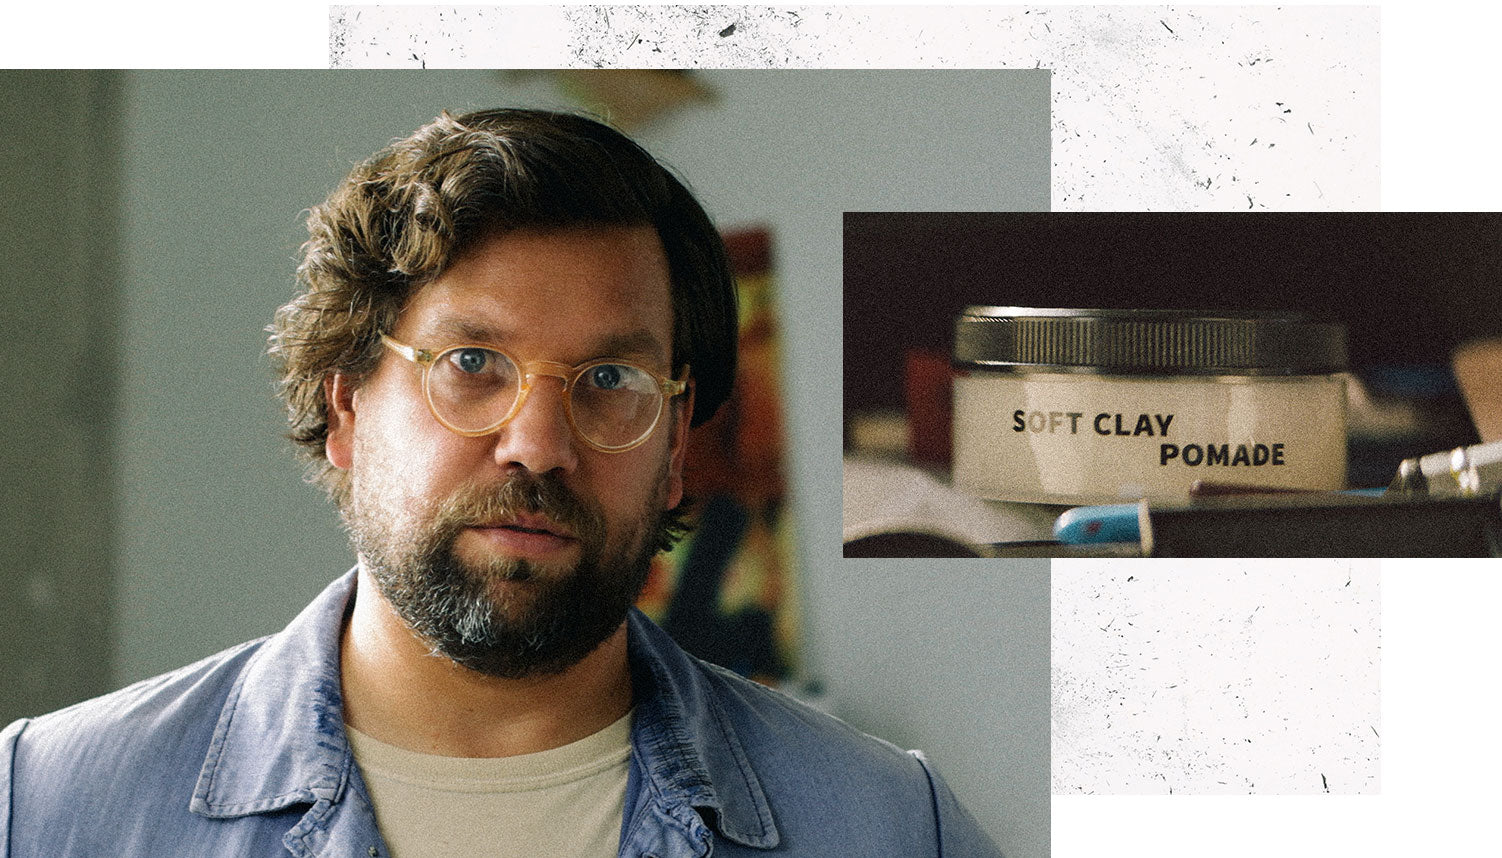 collage of man with glasses and beard and brown wavy hair with loose curls and Rudy's Soft Clay Pomade